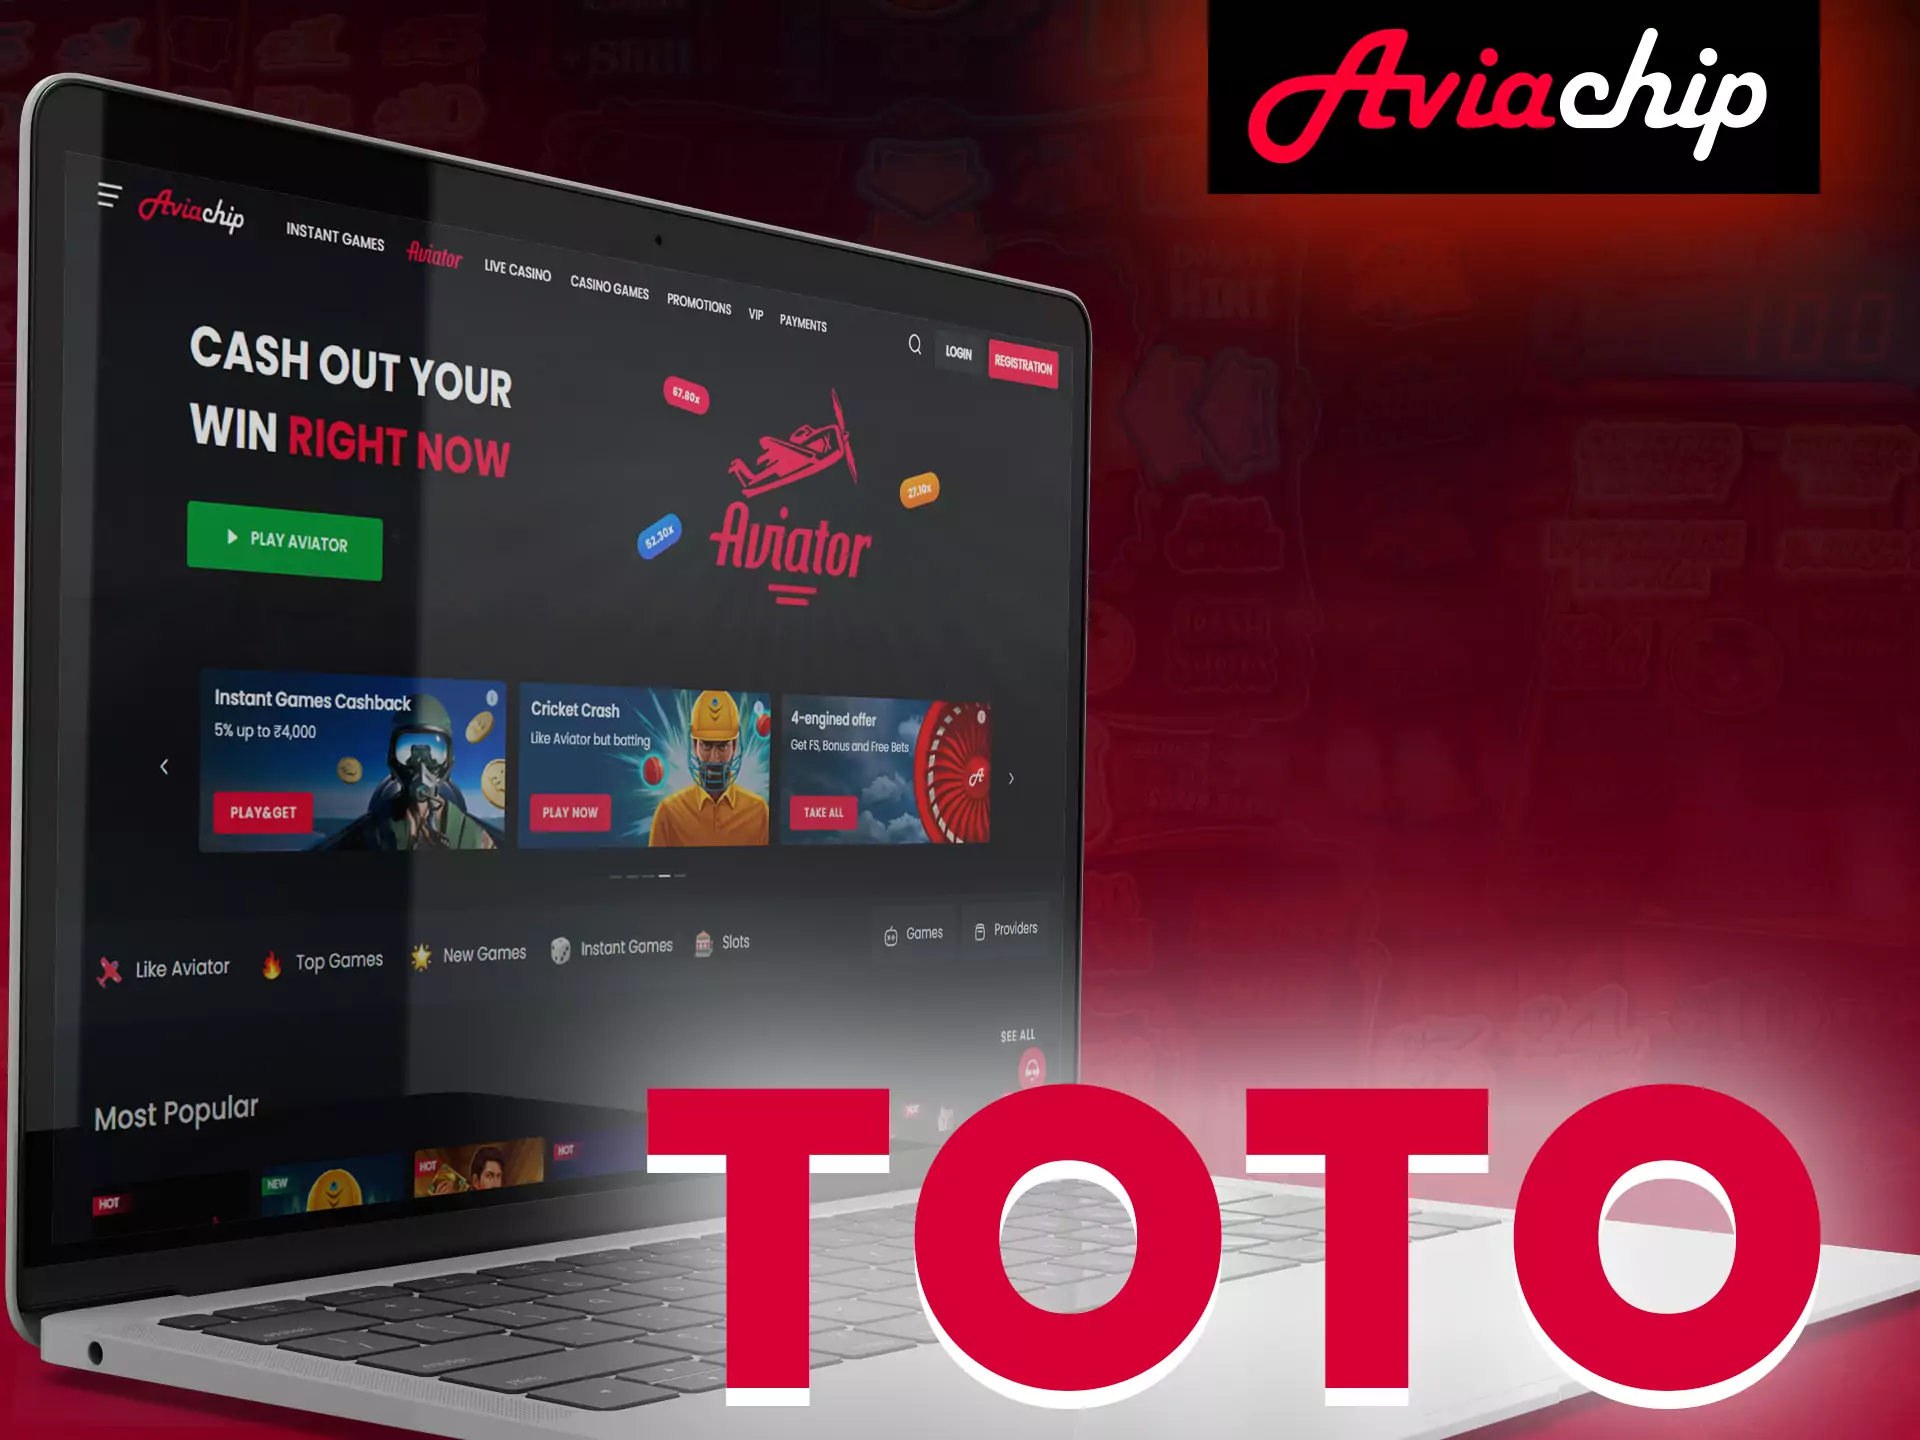 On Aviachip, play TOTO.